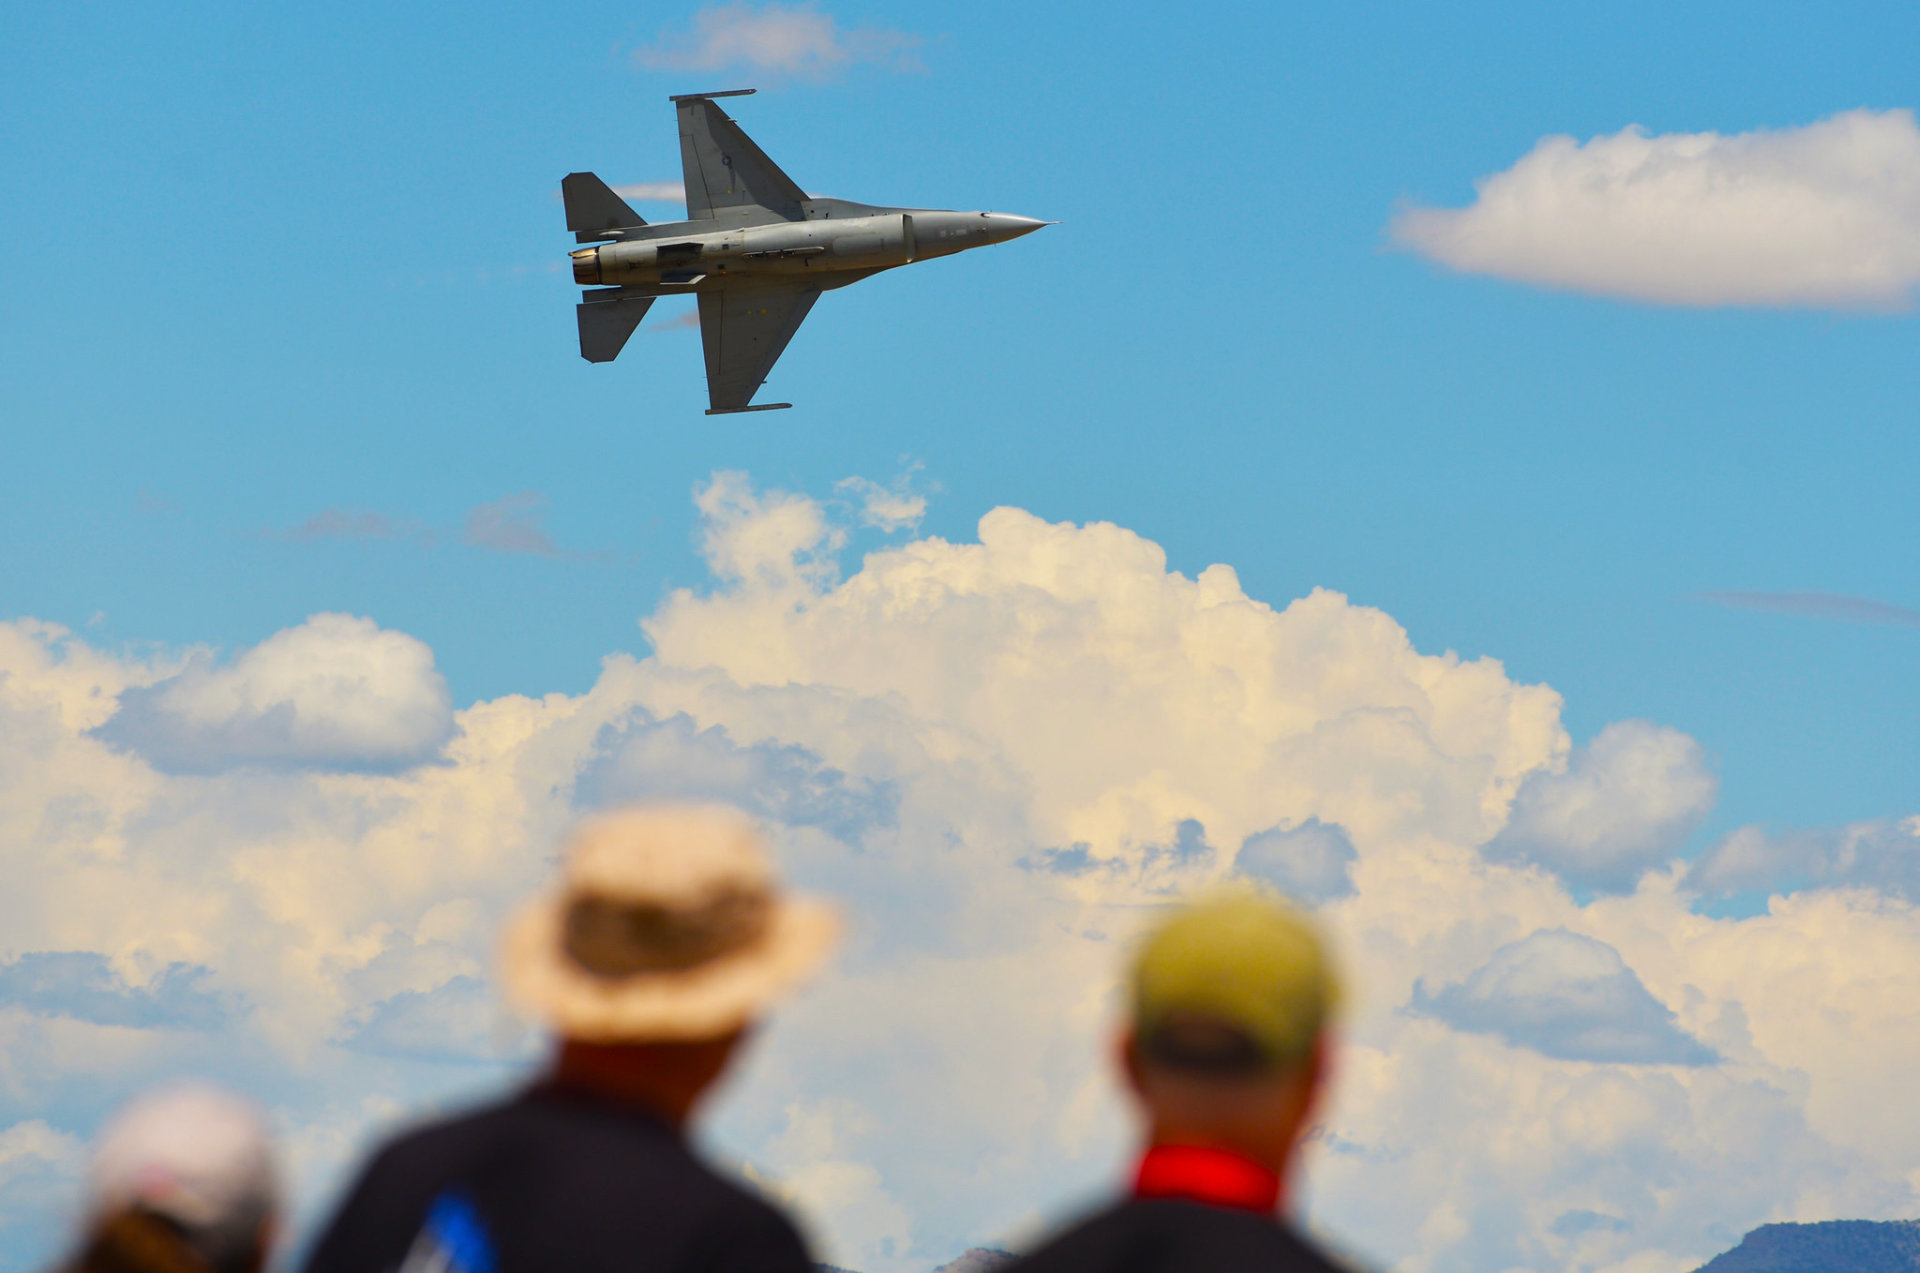 Grand Junction Air Show 2023 in Colorado Dates